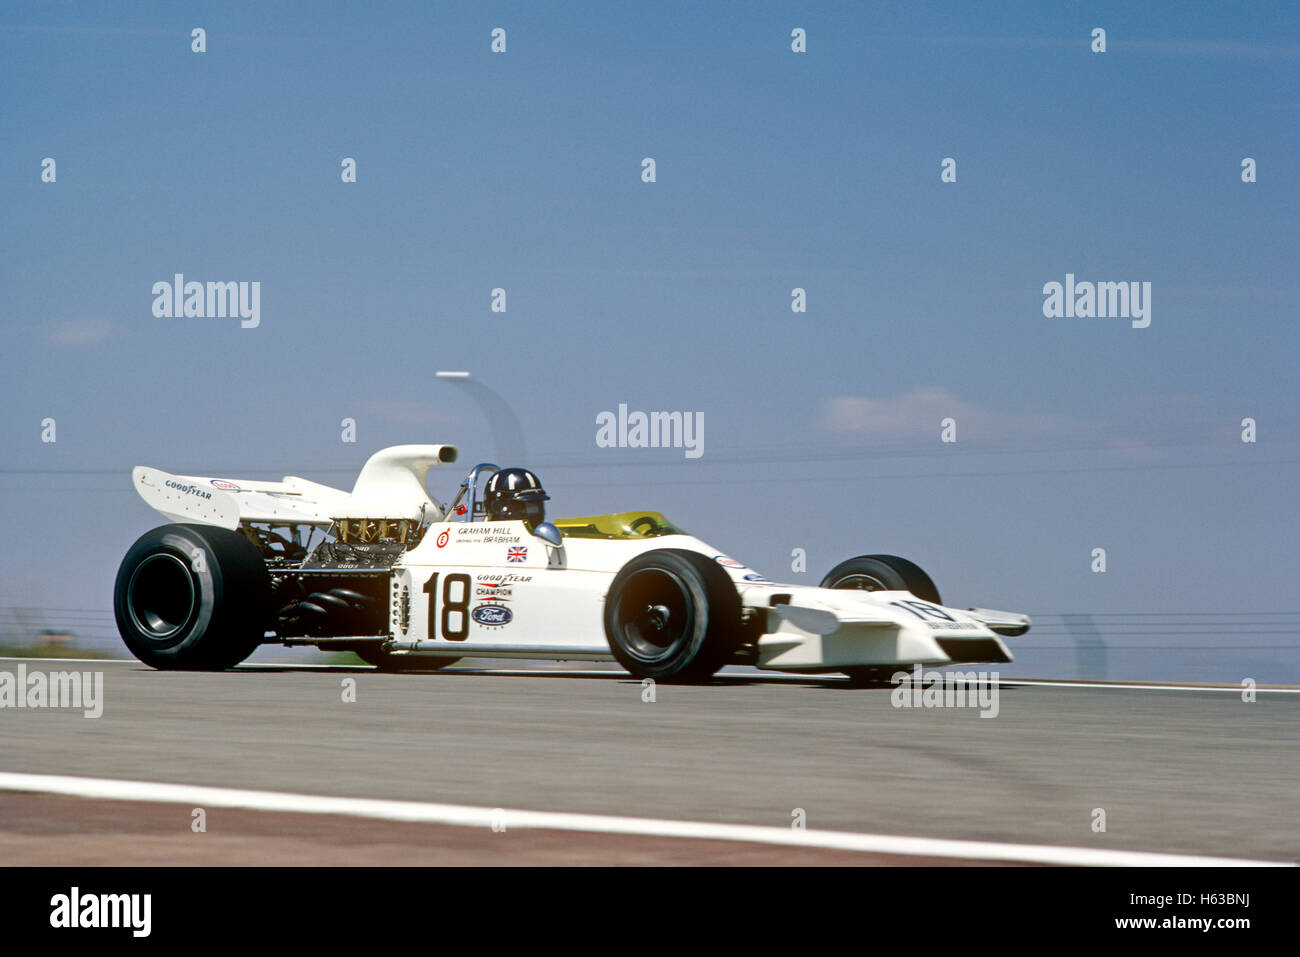 Graham Hill driving a Brabham BT37 racing car in 1972 Stock Photo